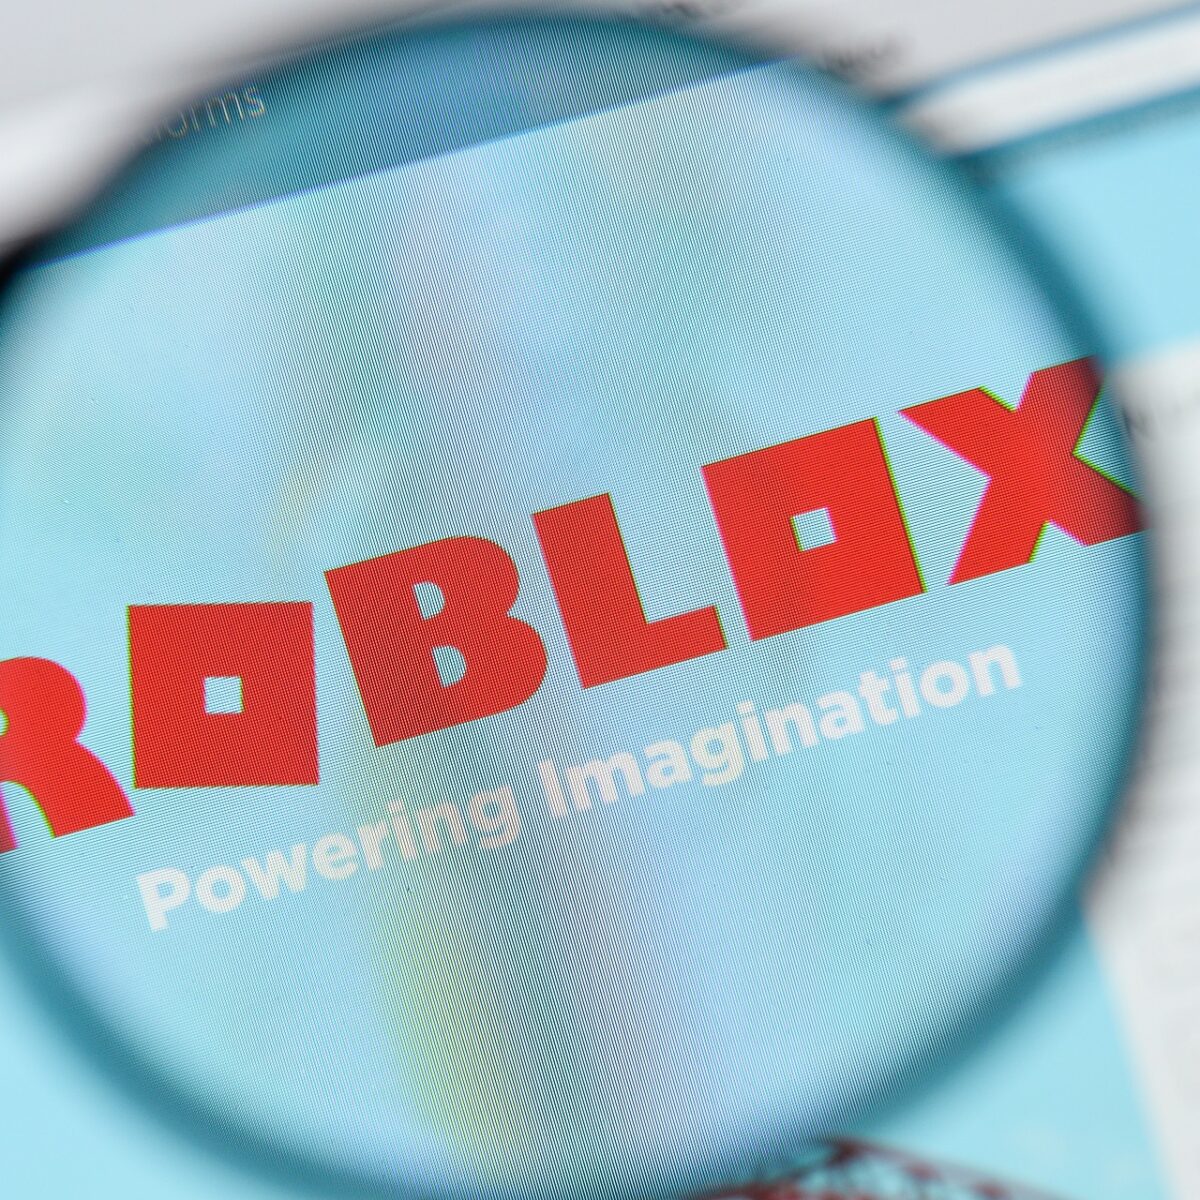 Fix Your Browser Is Not Supported Roblox Error - run faster roblox